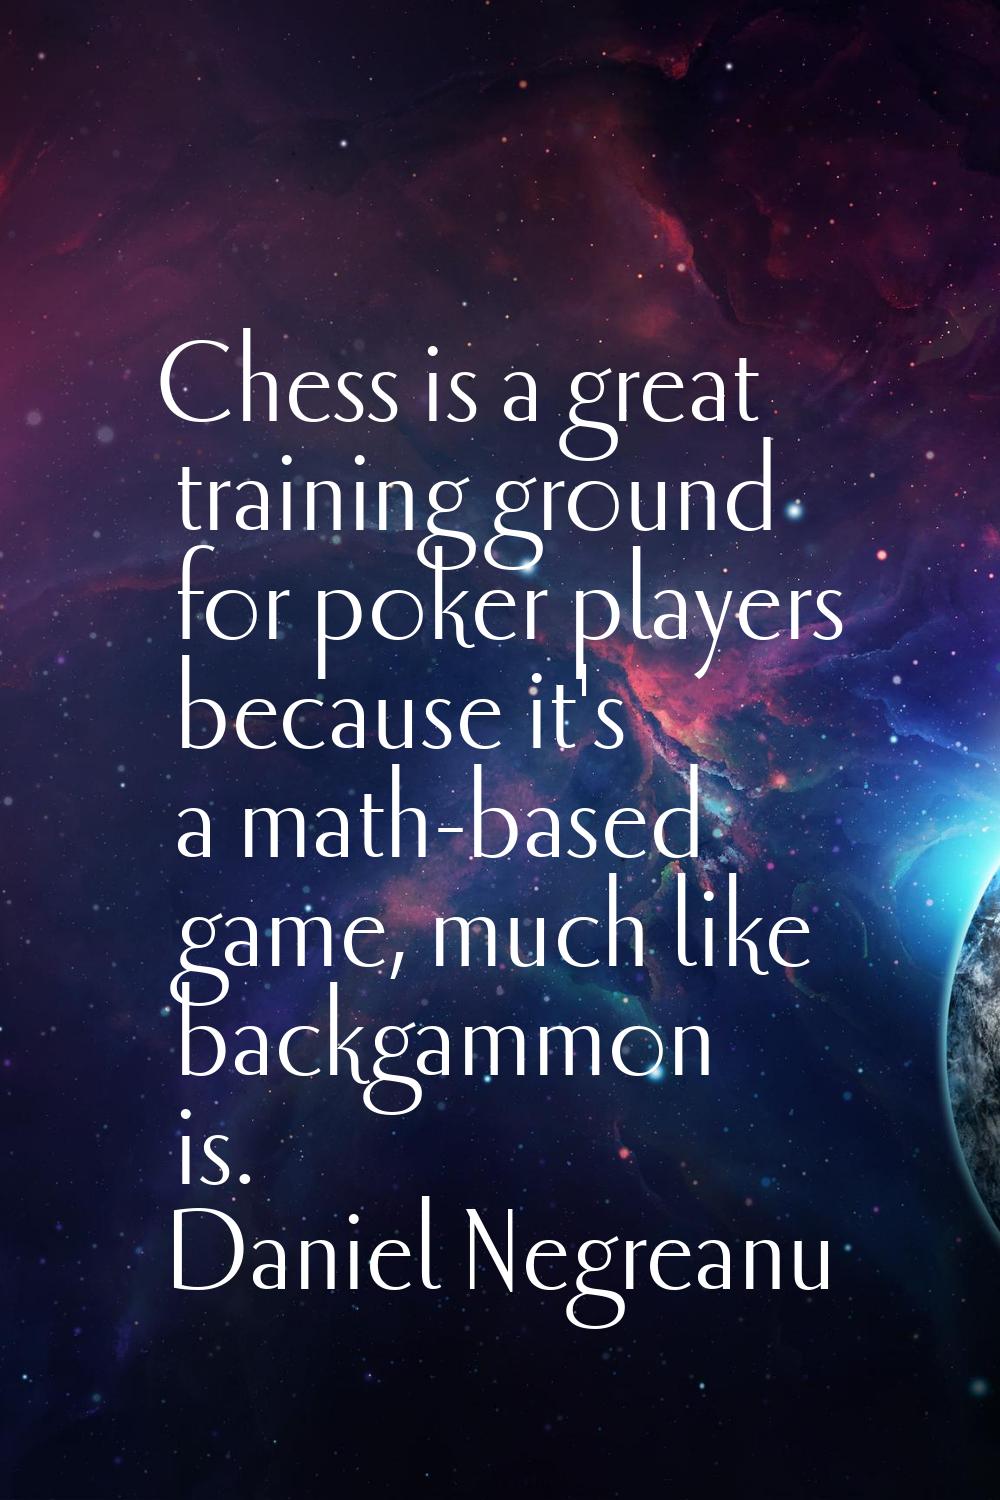 Chess is a great training ground for poker players because it's a math-based game, much like backga